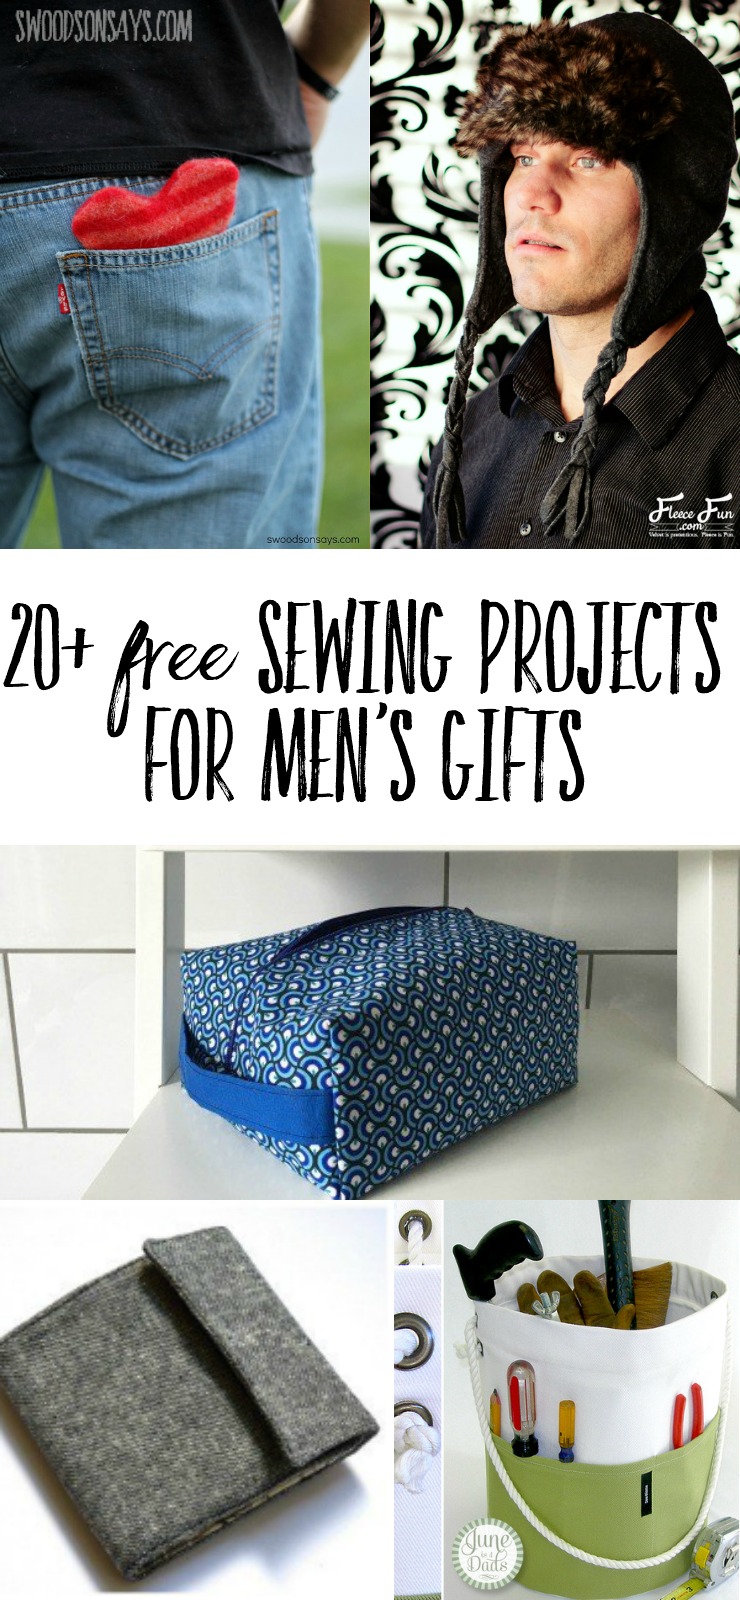 20+ Free Sewing Projects for Men's Gifts! Fresh new ideas to sew for men, all with free tutorials and patterns linked. Don't stress over sewing ideas for guys, check out this list! #sewingformen #diypresentsformen